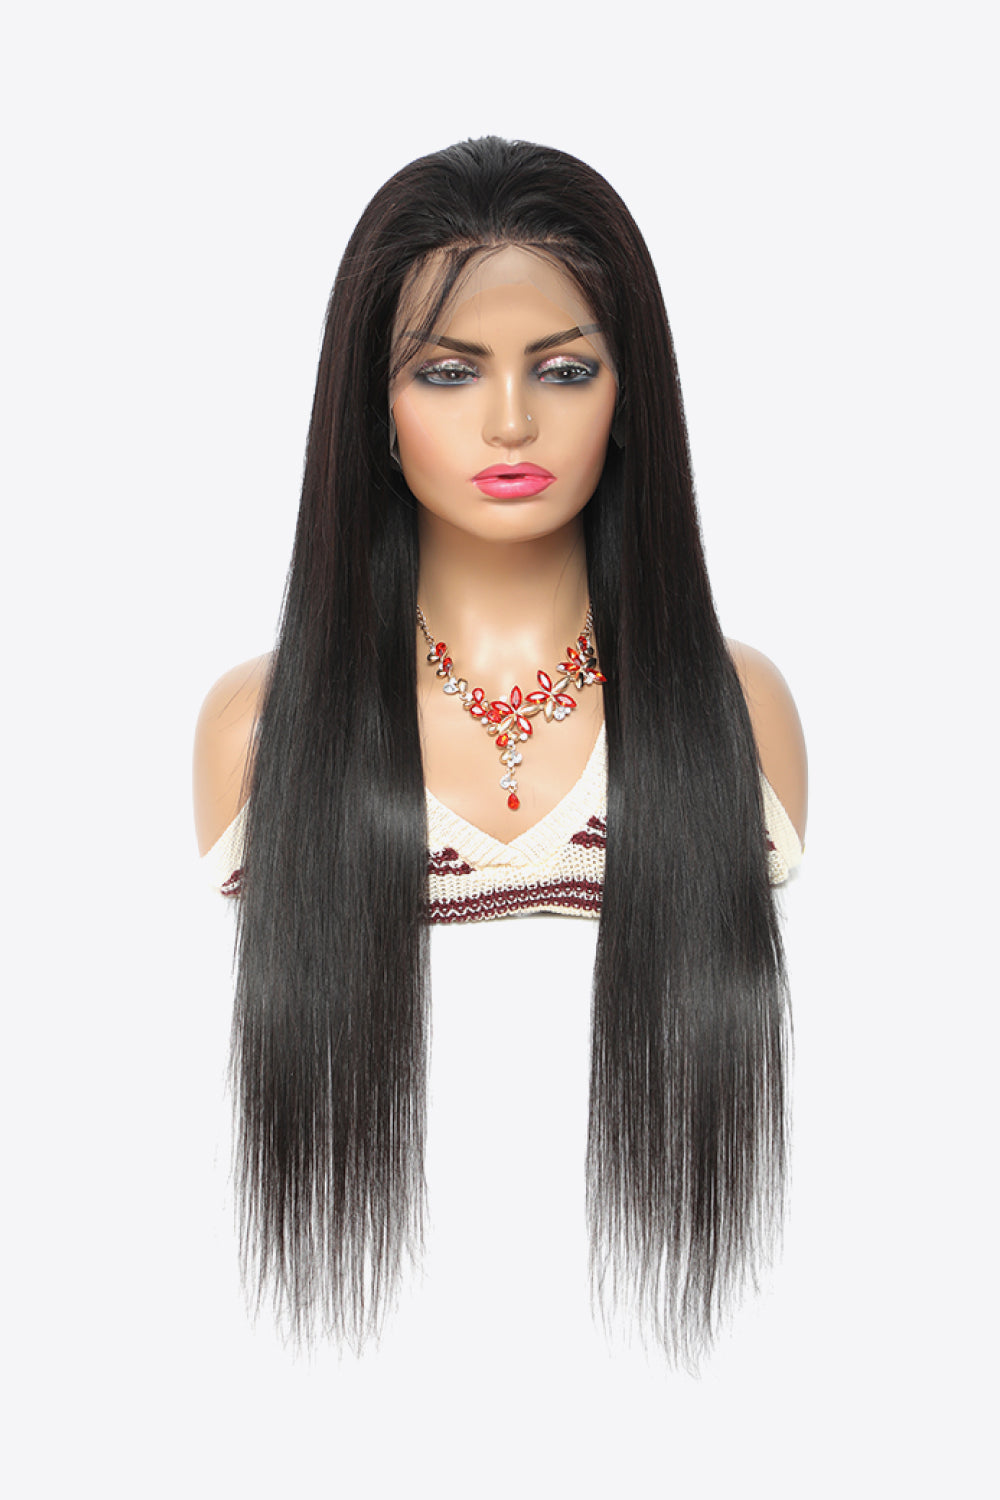 18" 13x4 Lace Front Wigs Virgin Hair Natural Color 150% Density - AllIn Computer